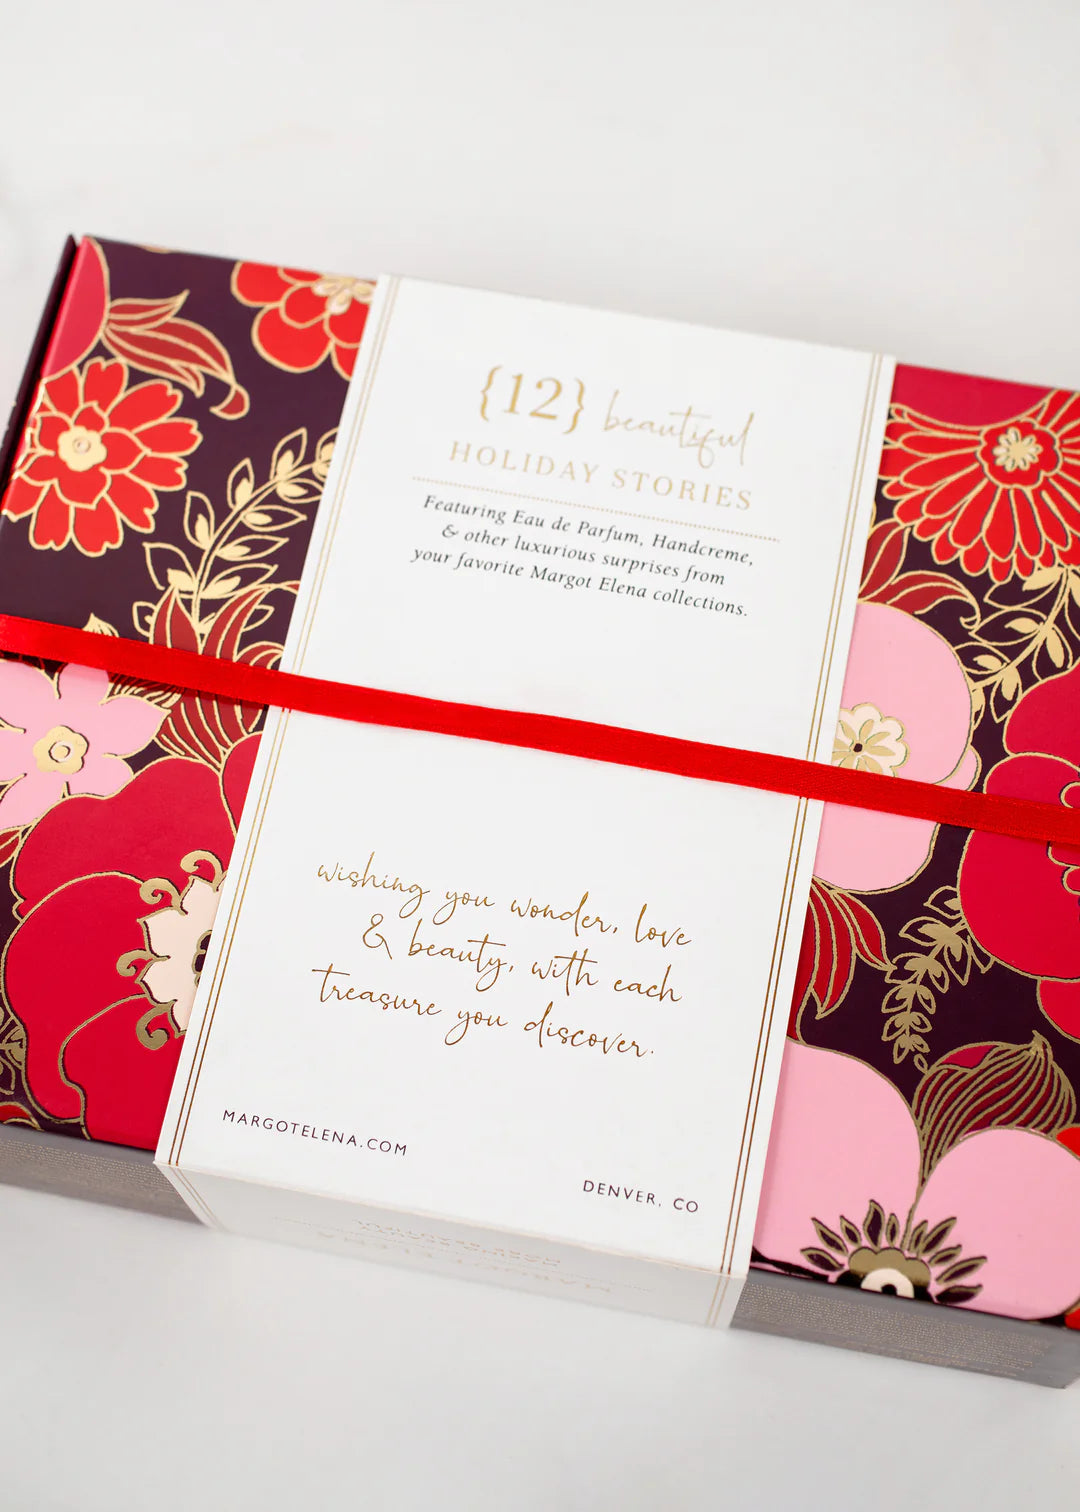 A decorative box adorned with floral designs in red, pink, and gold. A white band with text in elegant gold and red font wraps around the box, reading: "Margot Elena Advent Calendar" by Margot Elena and "wishing you wonder, love & beauty with each treasure you discover.